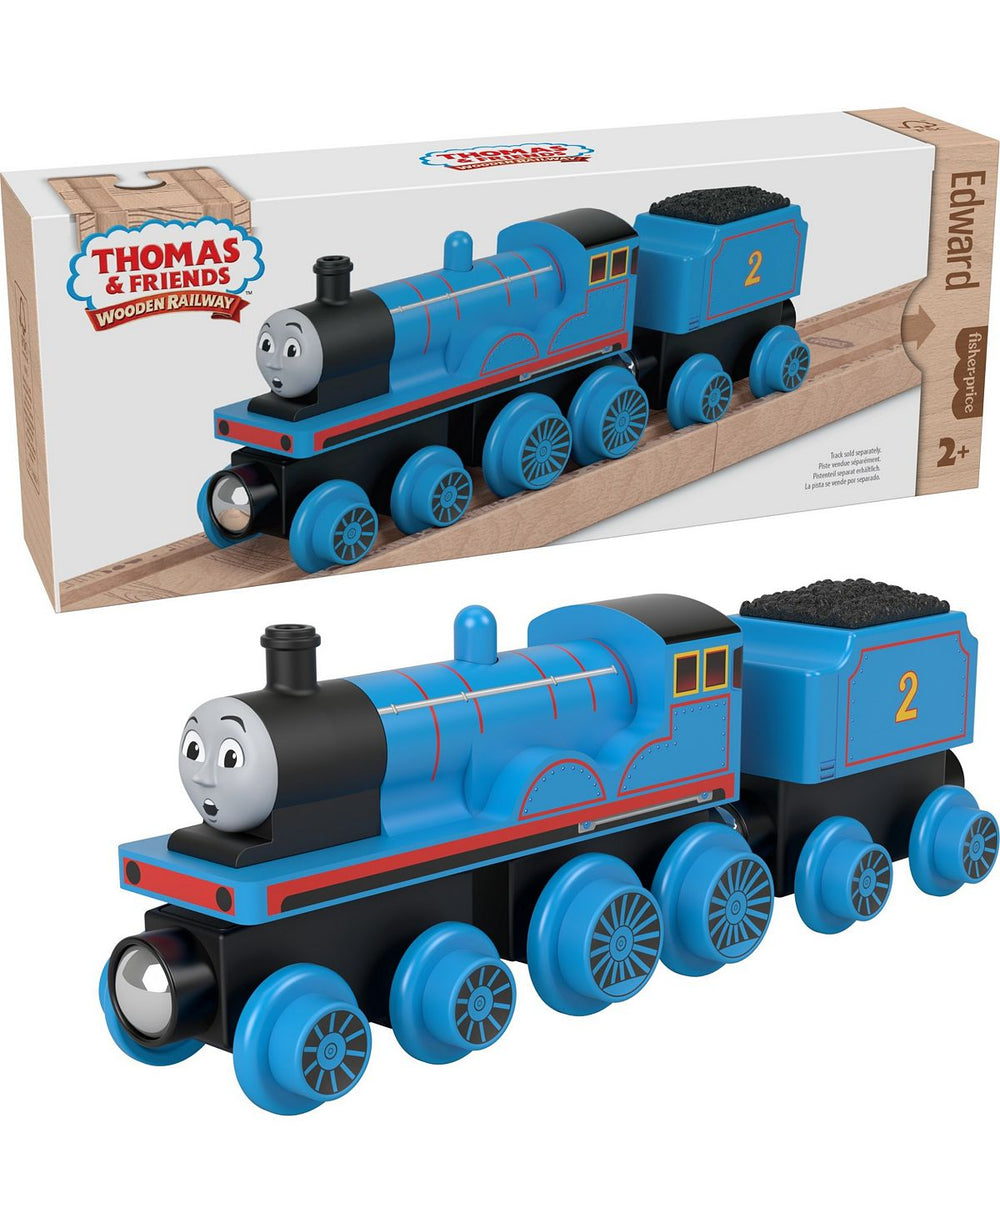 Fisher-Price Thomas & Friends Wooden Railway Edward Engine with Coal-Car